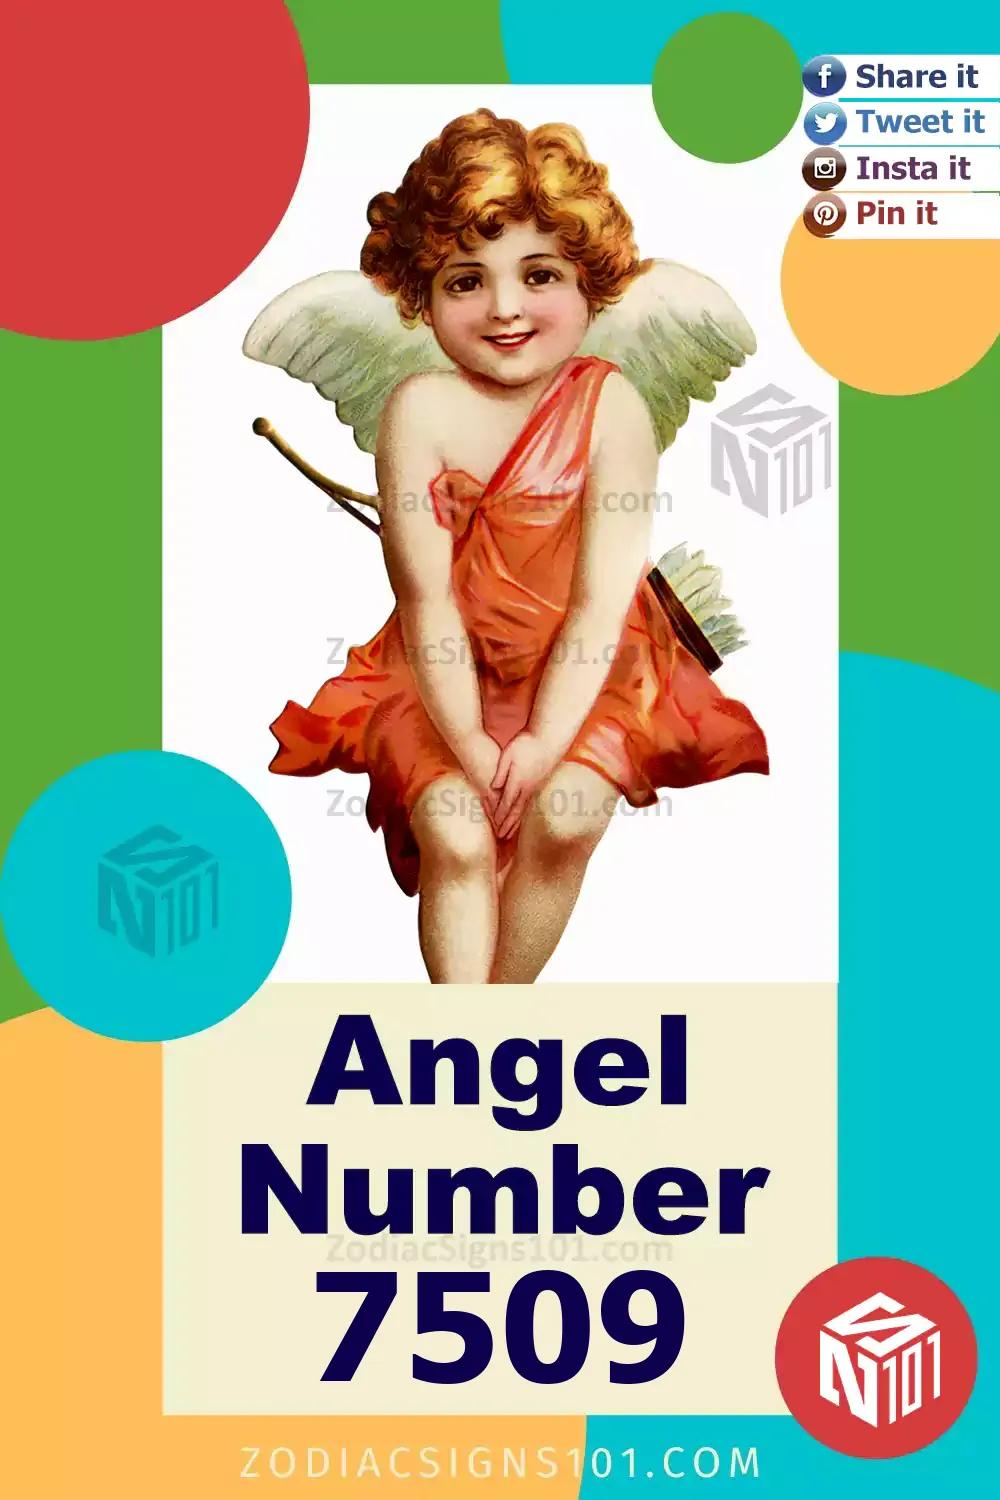 7509 Angel Number Meaning